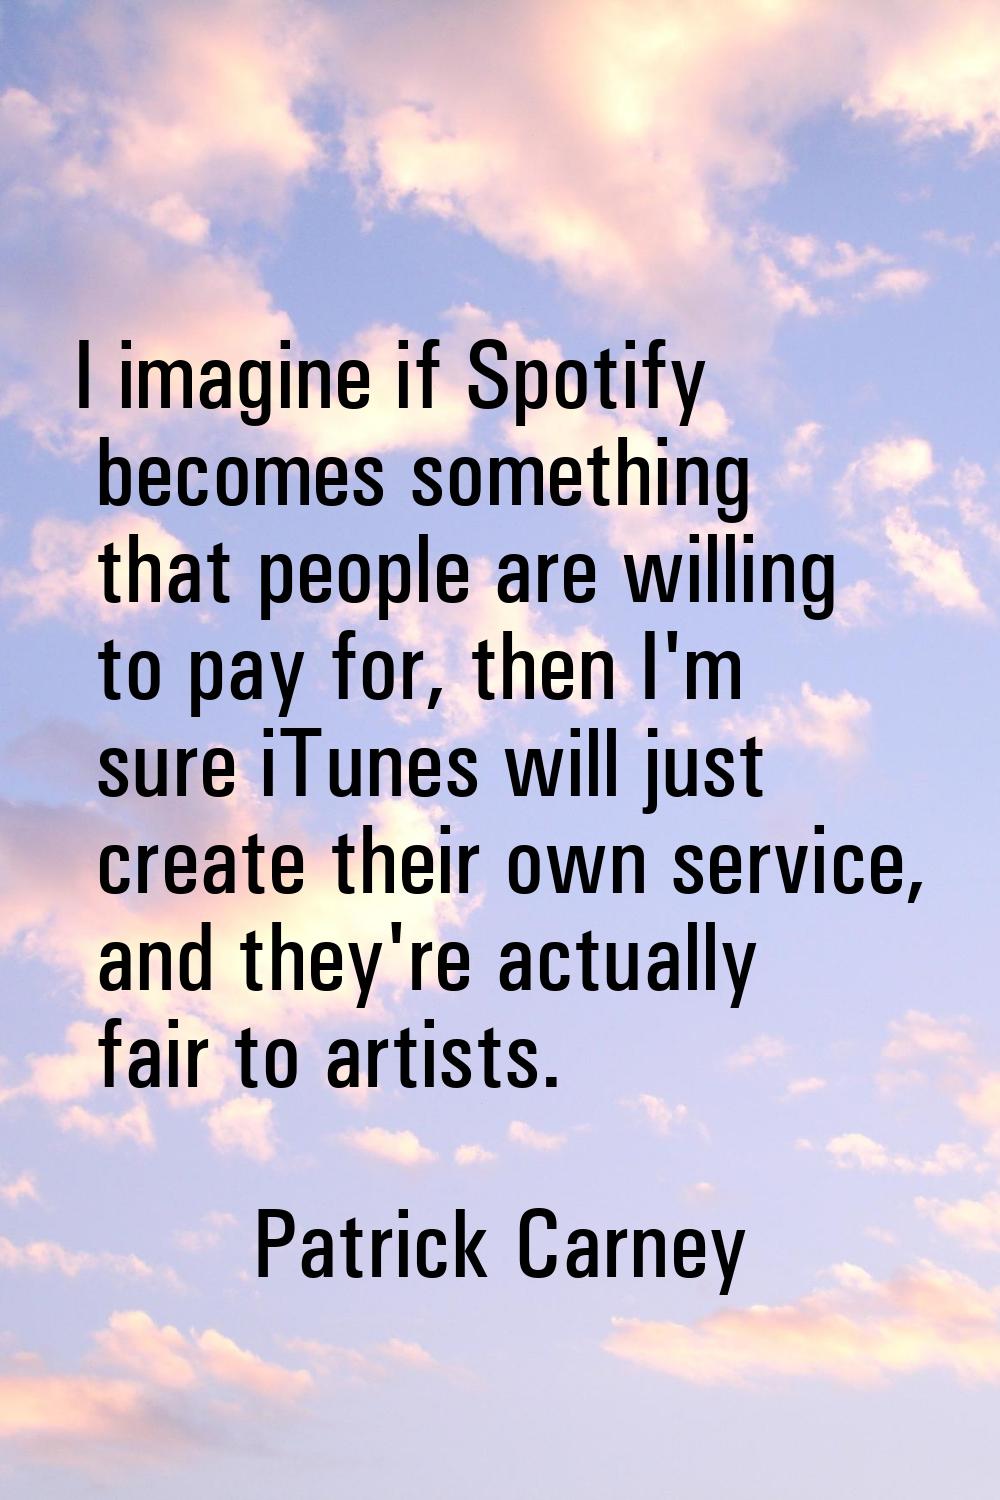 I imagine if Spotify becomes something that people are willing to pay for, then I'm sure iTunes wil